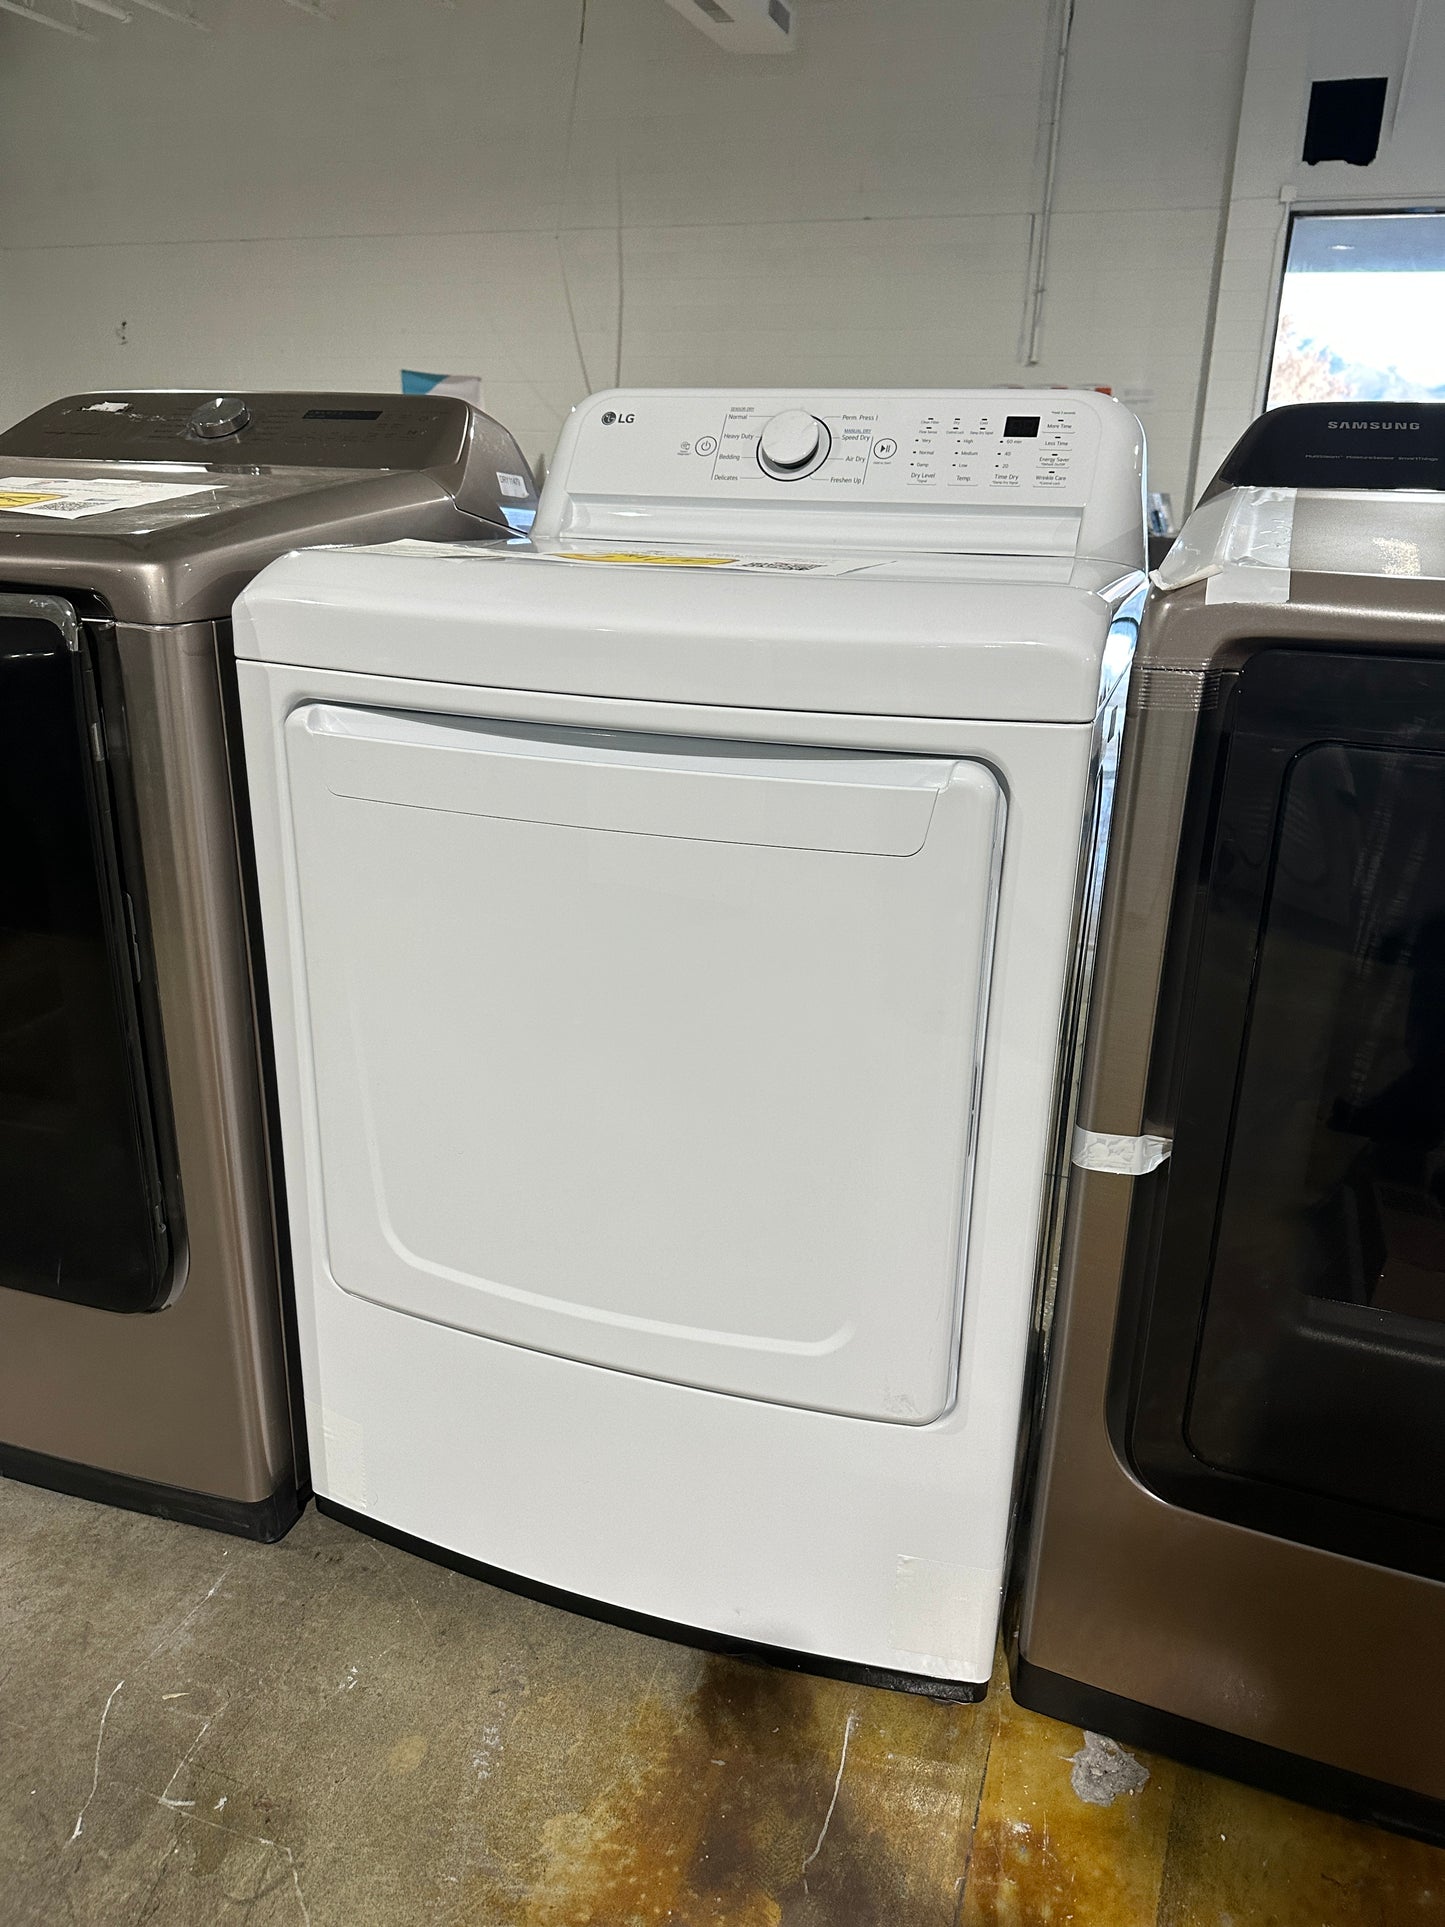 NEW LG - 7.3 Cu. Ft. Electric Dryer with Sensor Dry - MODEL: DLE7000W  DRY11976S